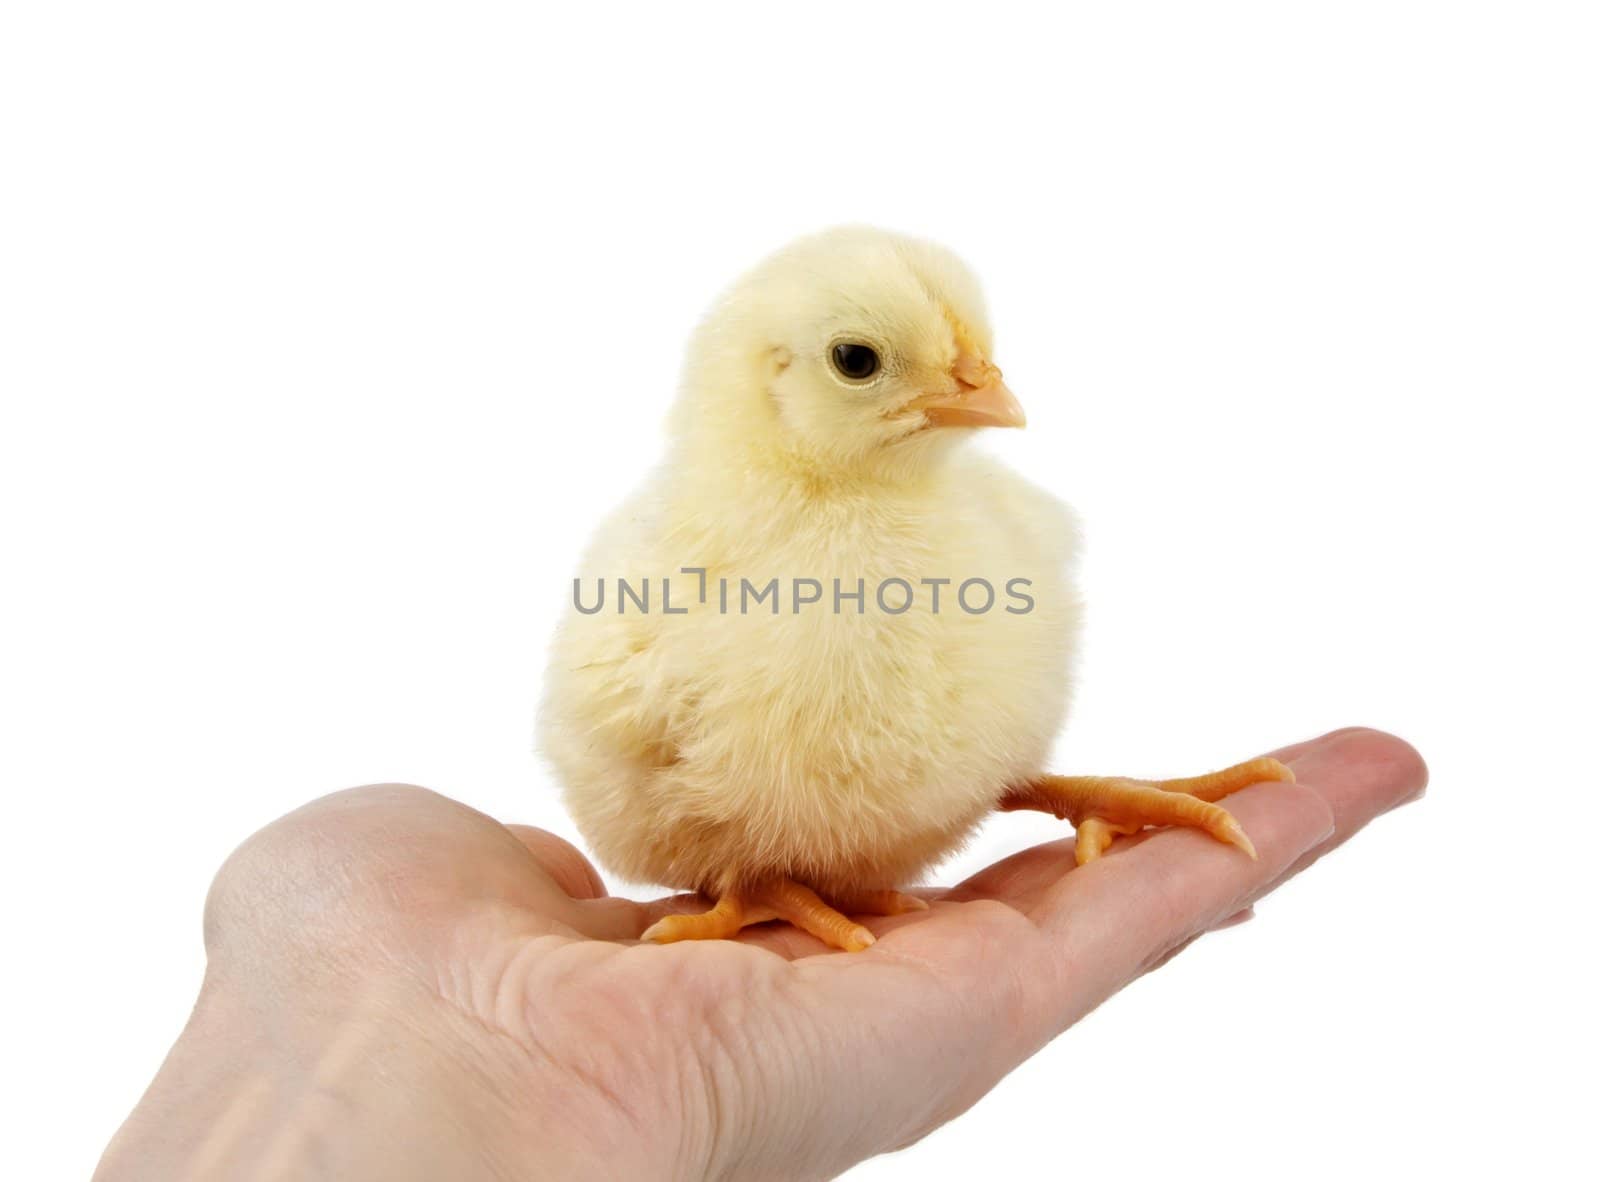 little yellow chick in a hand by lanalanglois